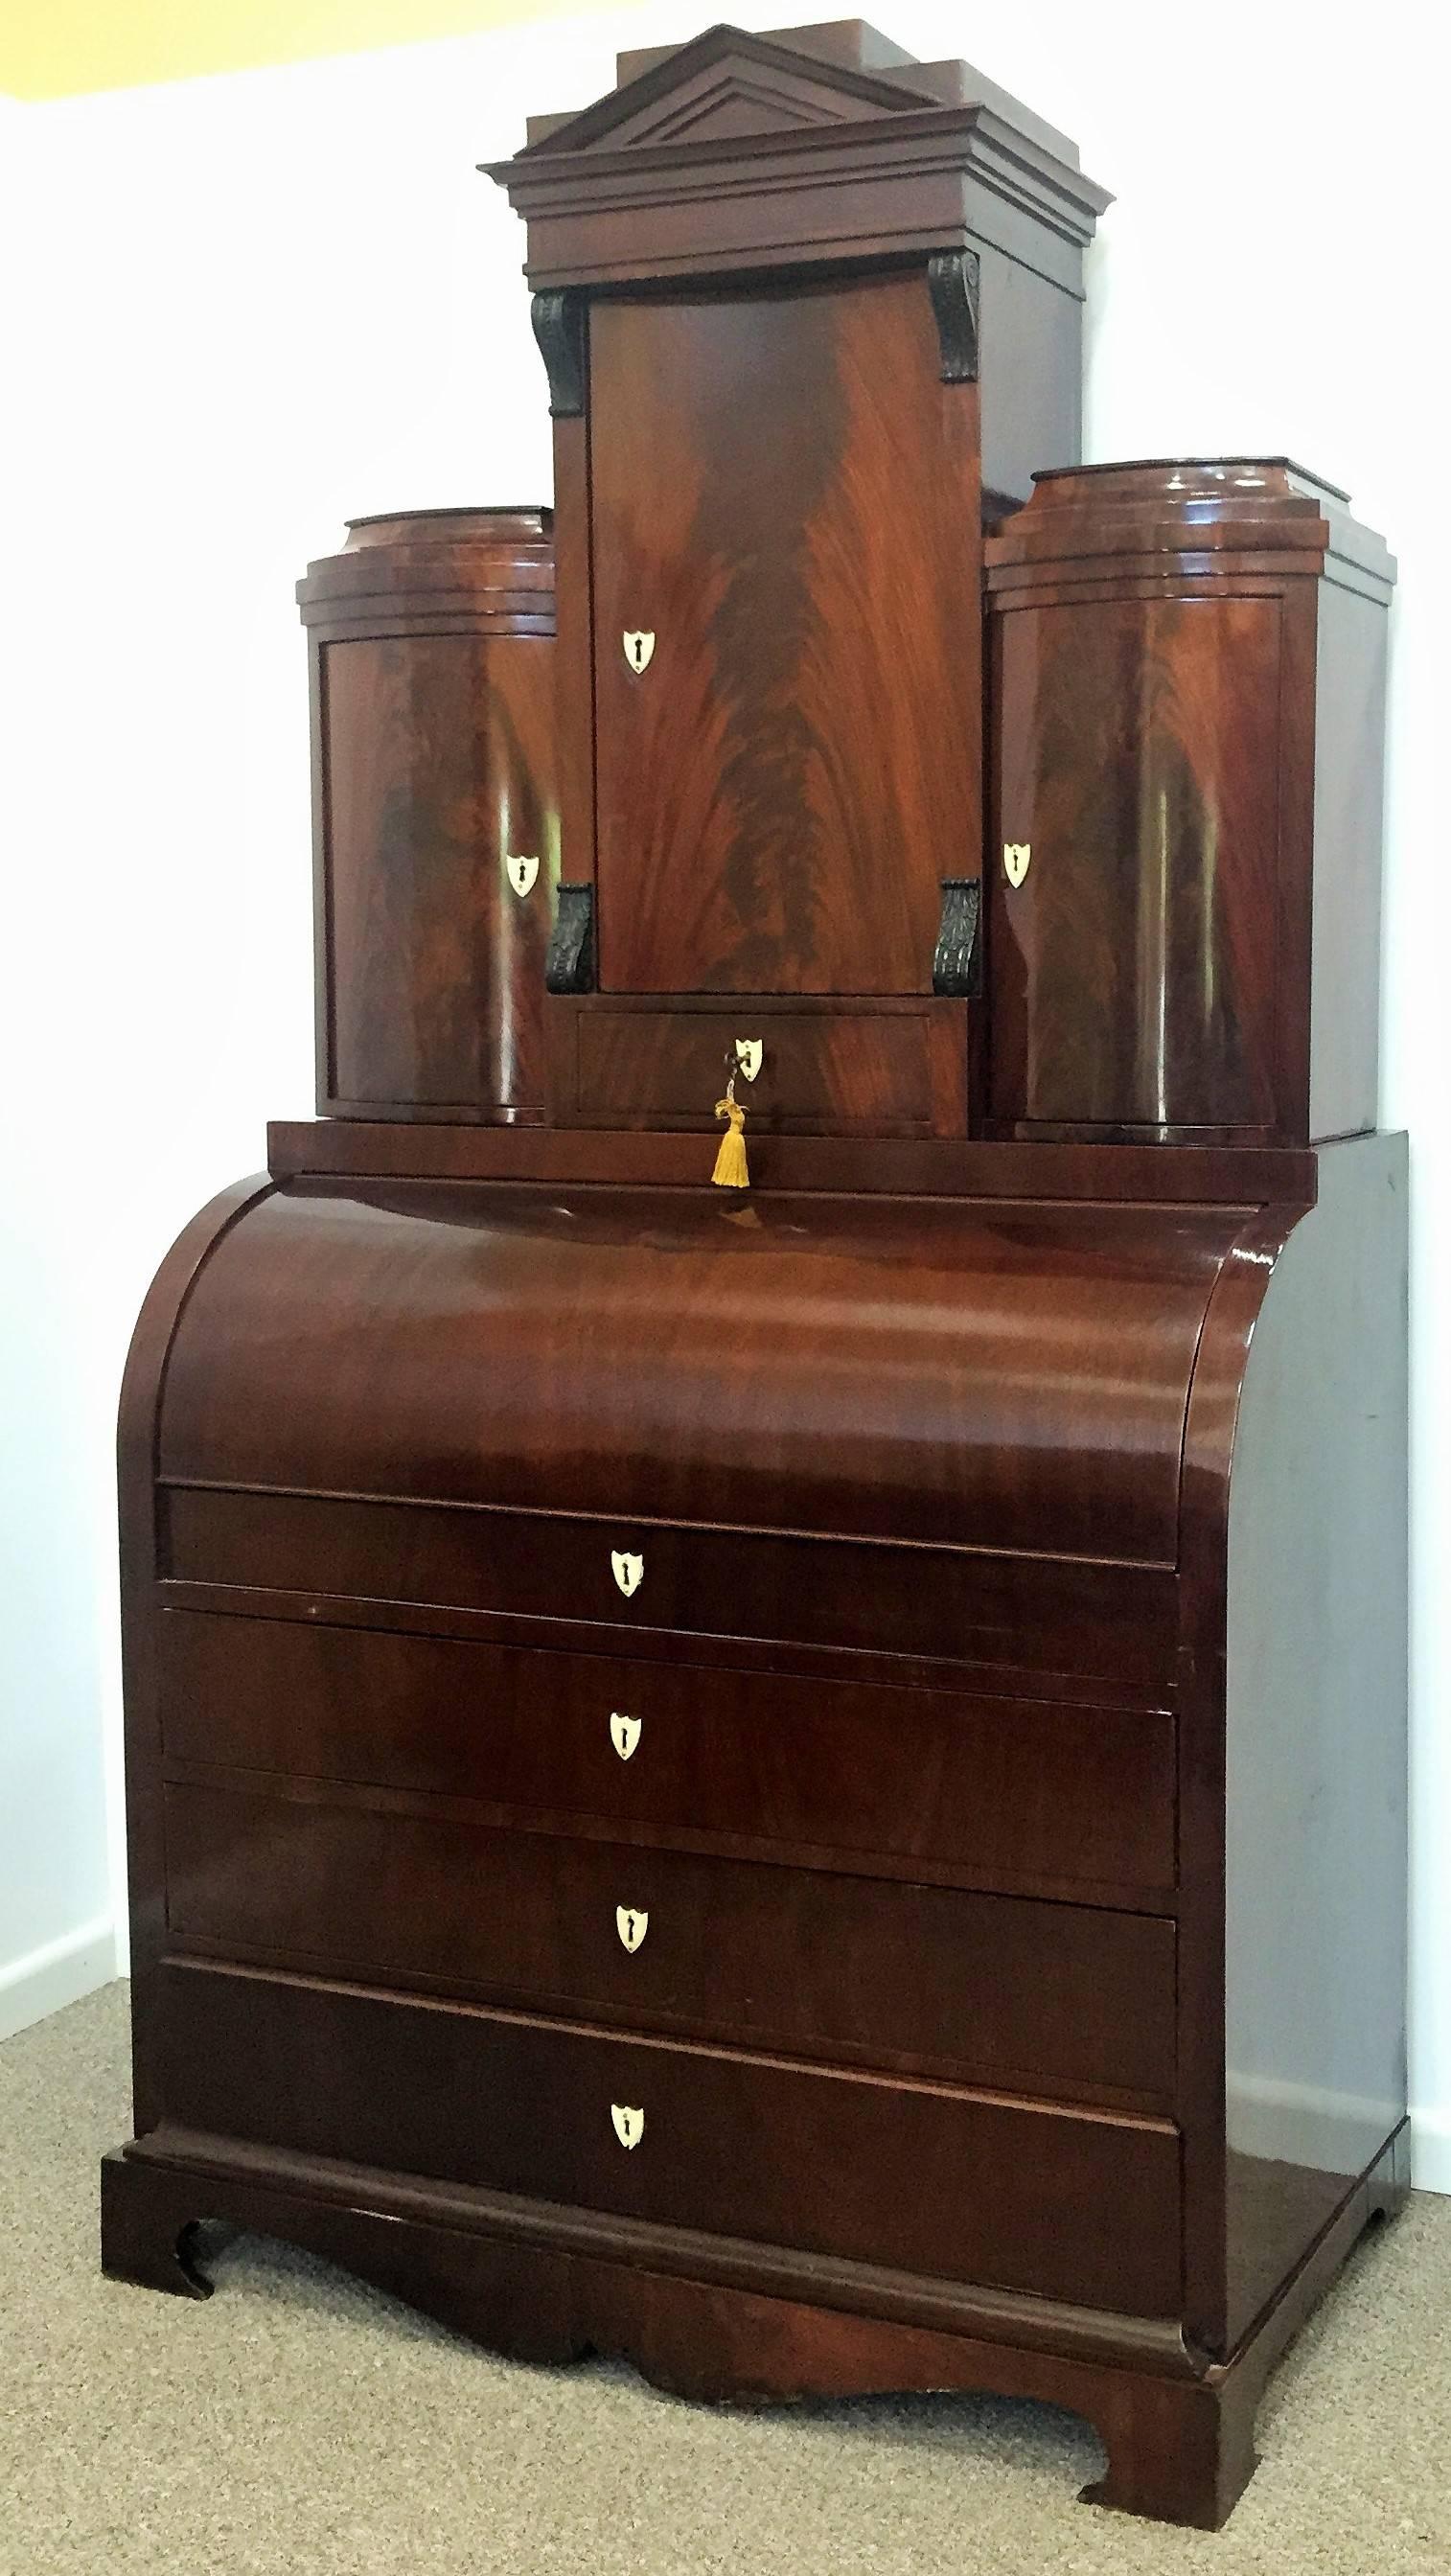 A very fine Empire secretary in West Indies mahogany, also known as Cuban mahogany, considered to be among the finest mahoganies because of its beautiful grain and color, Denmark, circa 1820.

Cylinder top opens to a pull-out desk which offers an